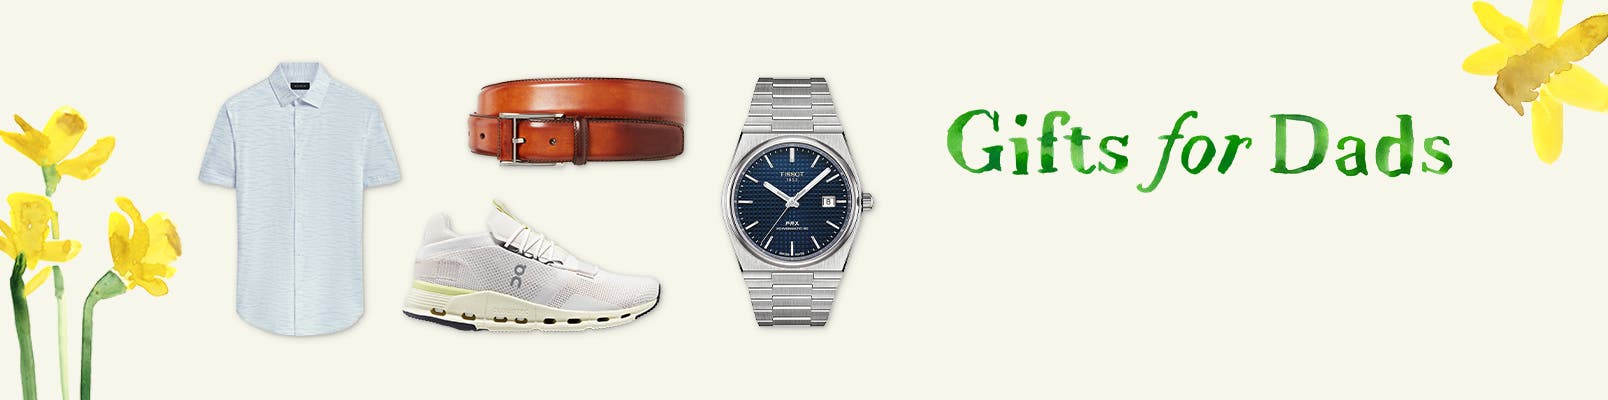 Gifts for dads, including a running shoe, belt and watch.